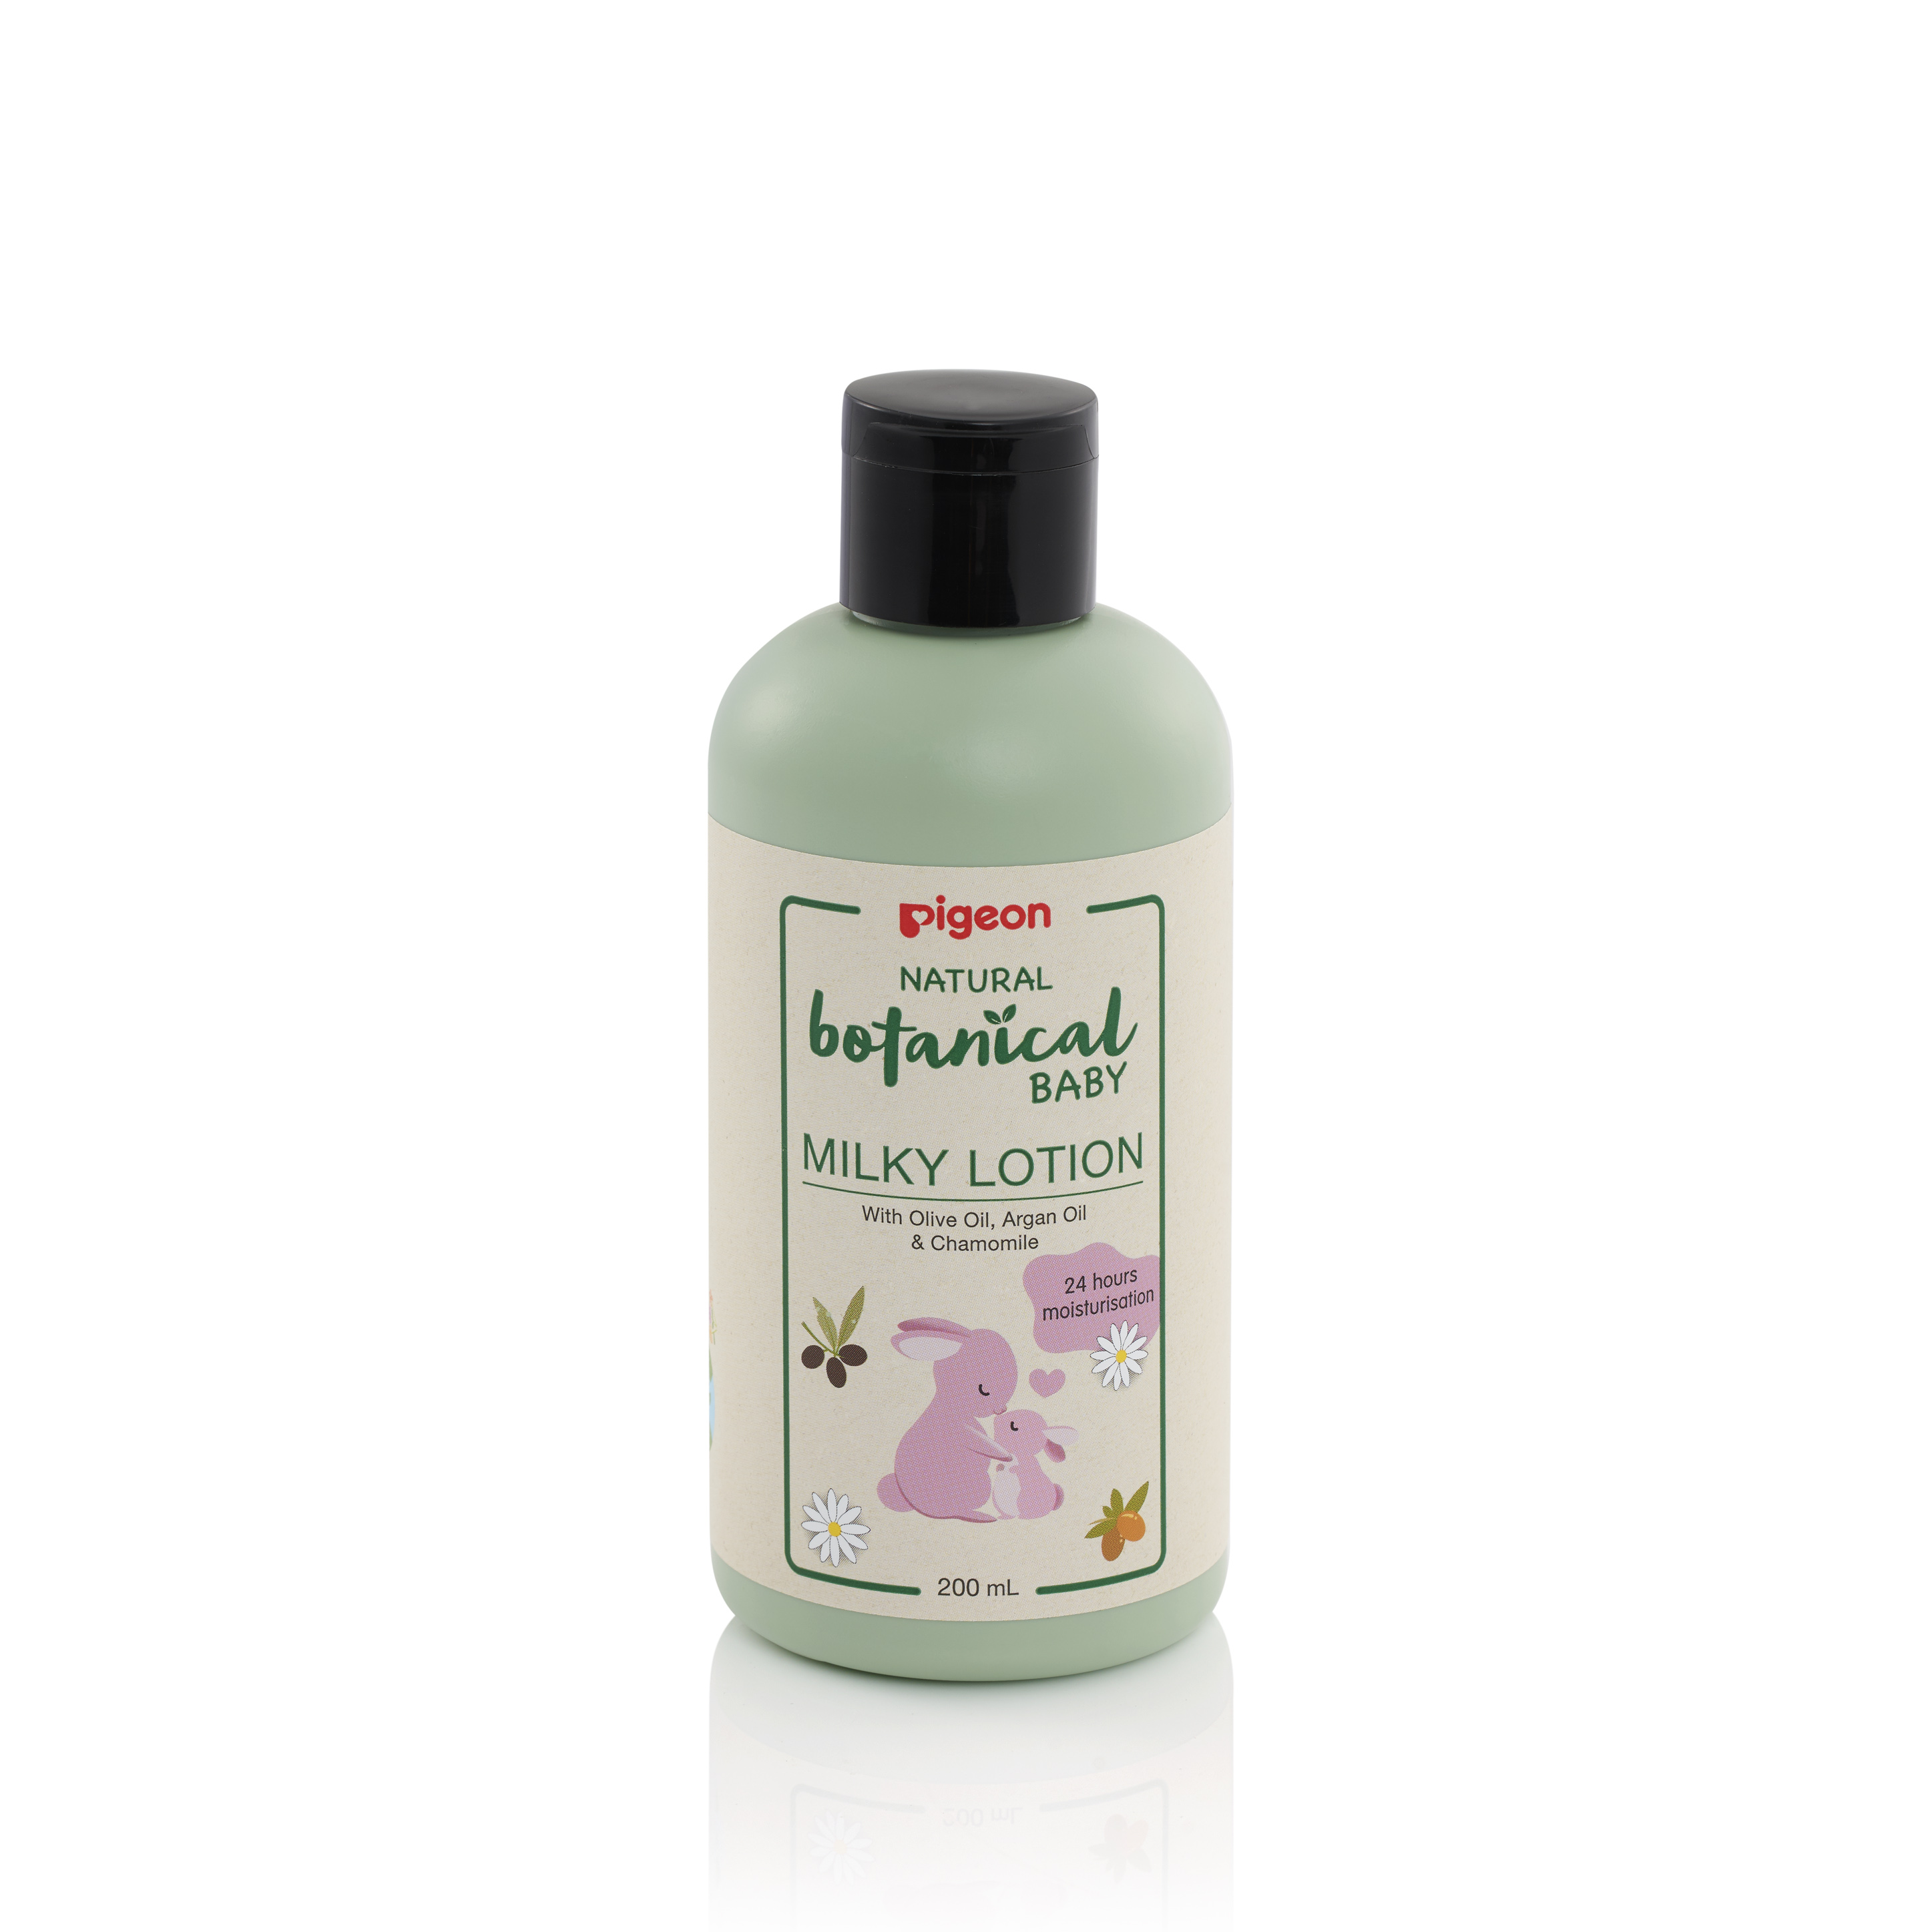 Pigeon Natural Botanical Baby Milky Lotion 200ml (PG-78411)